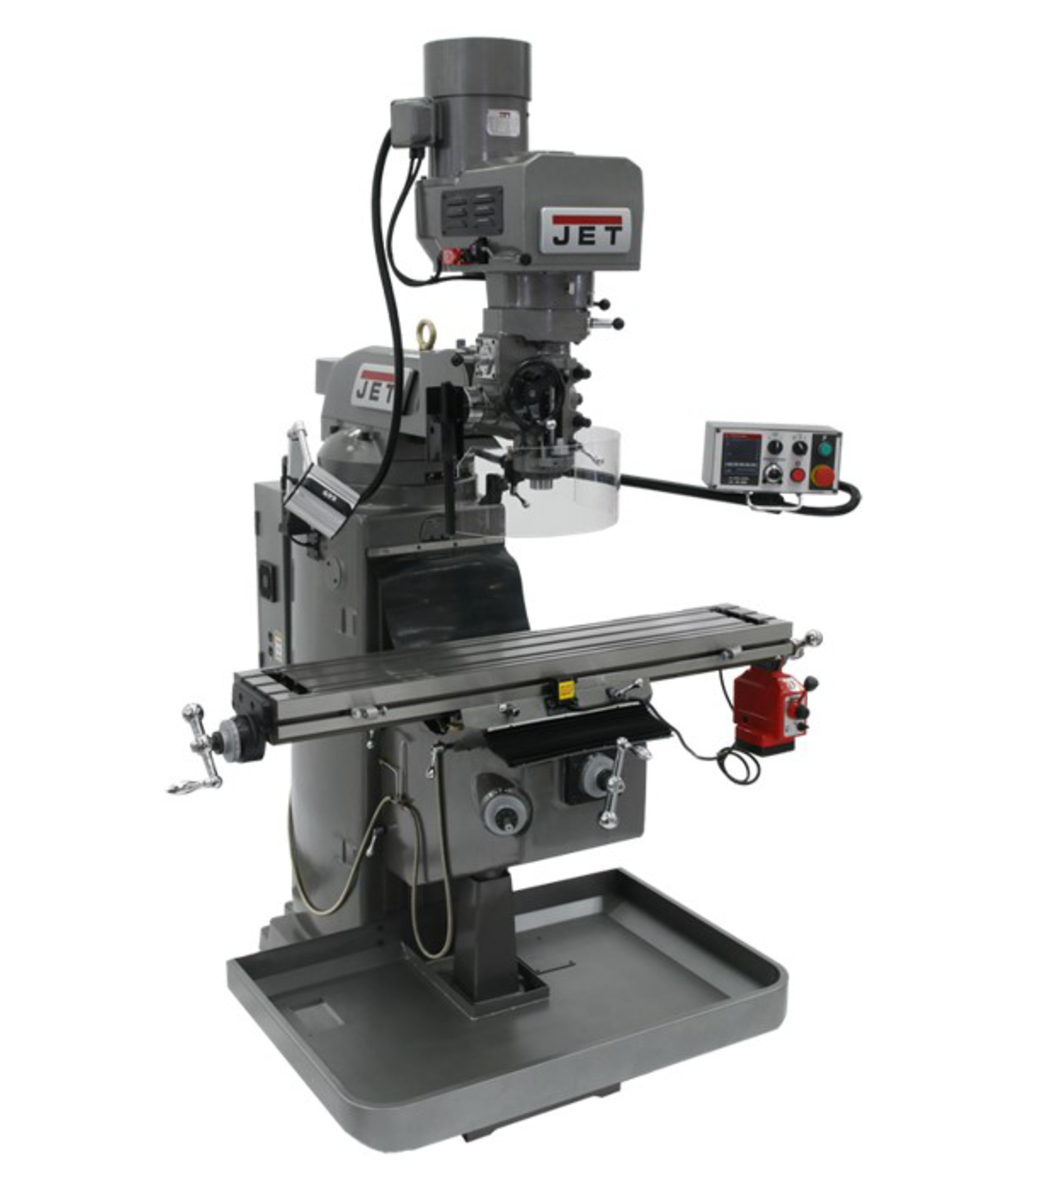 JTM-1050EVS2/230 Mill With Acu-Rite 203 DRO With X-Axis Powerfeed